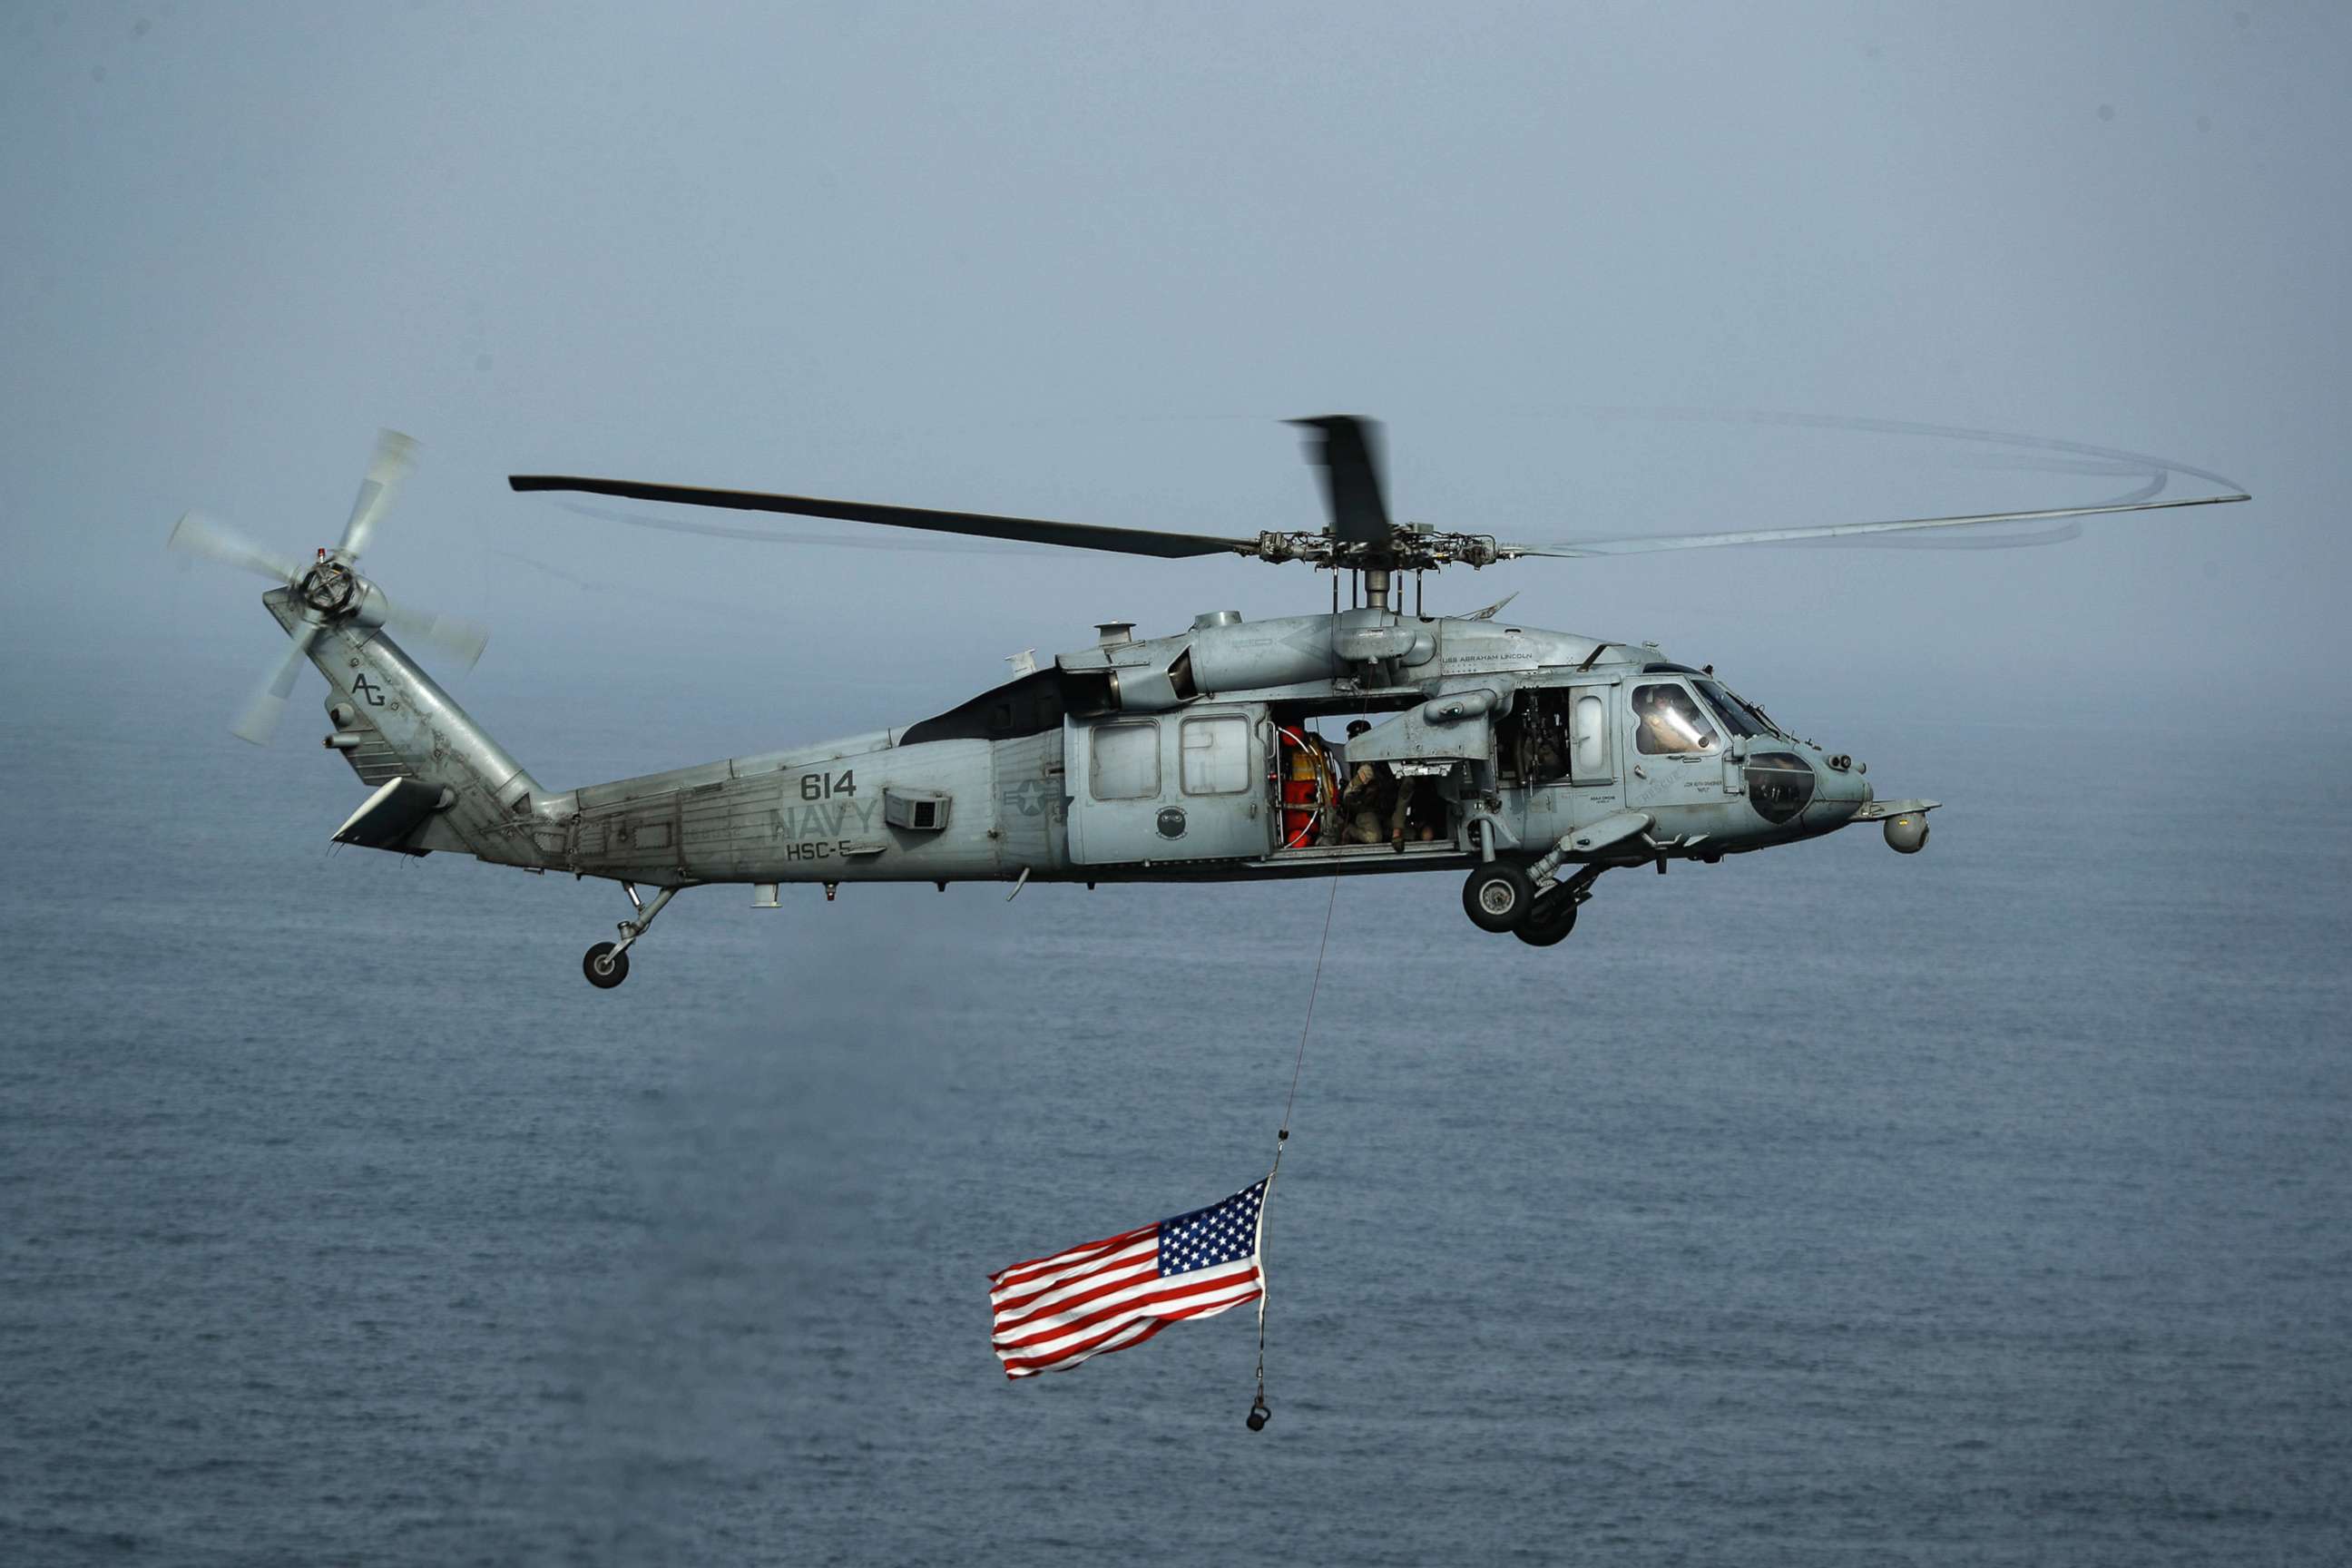 PHOTO: An MH-60S Sea Hawk helicopter flies over the Nimitz-class aircraft carrier USS Abraham Lincoln, July 4, 2019.